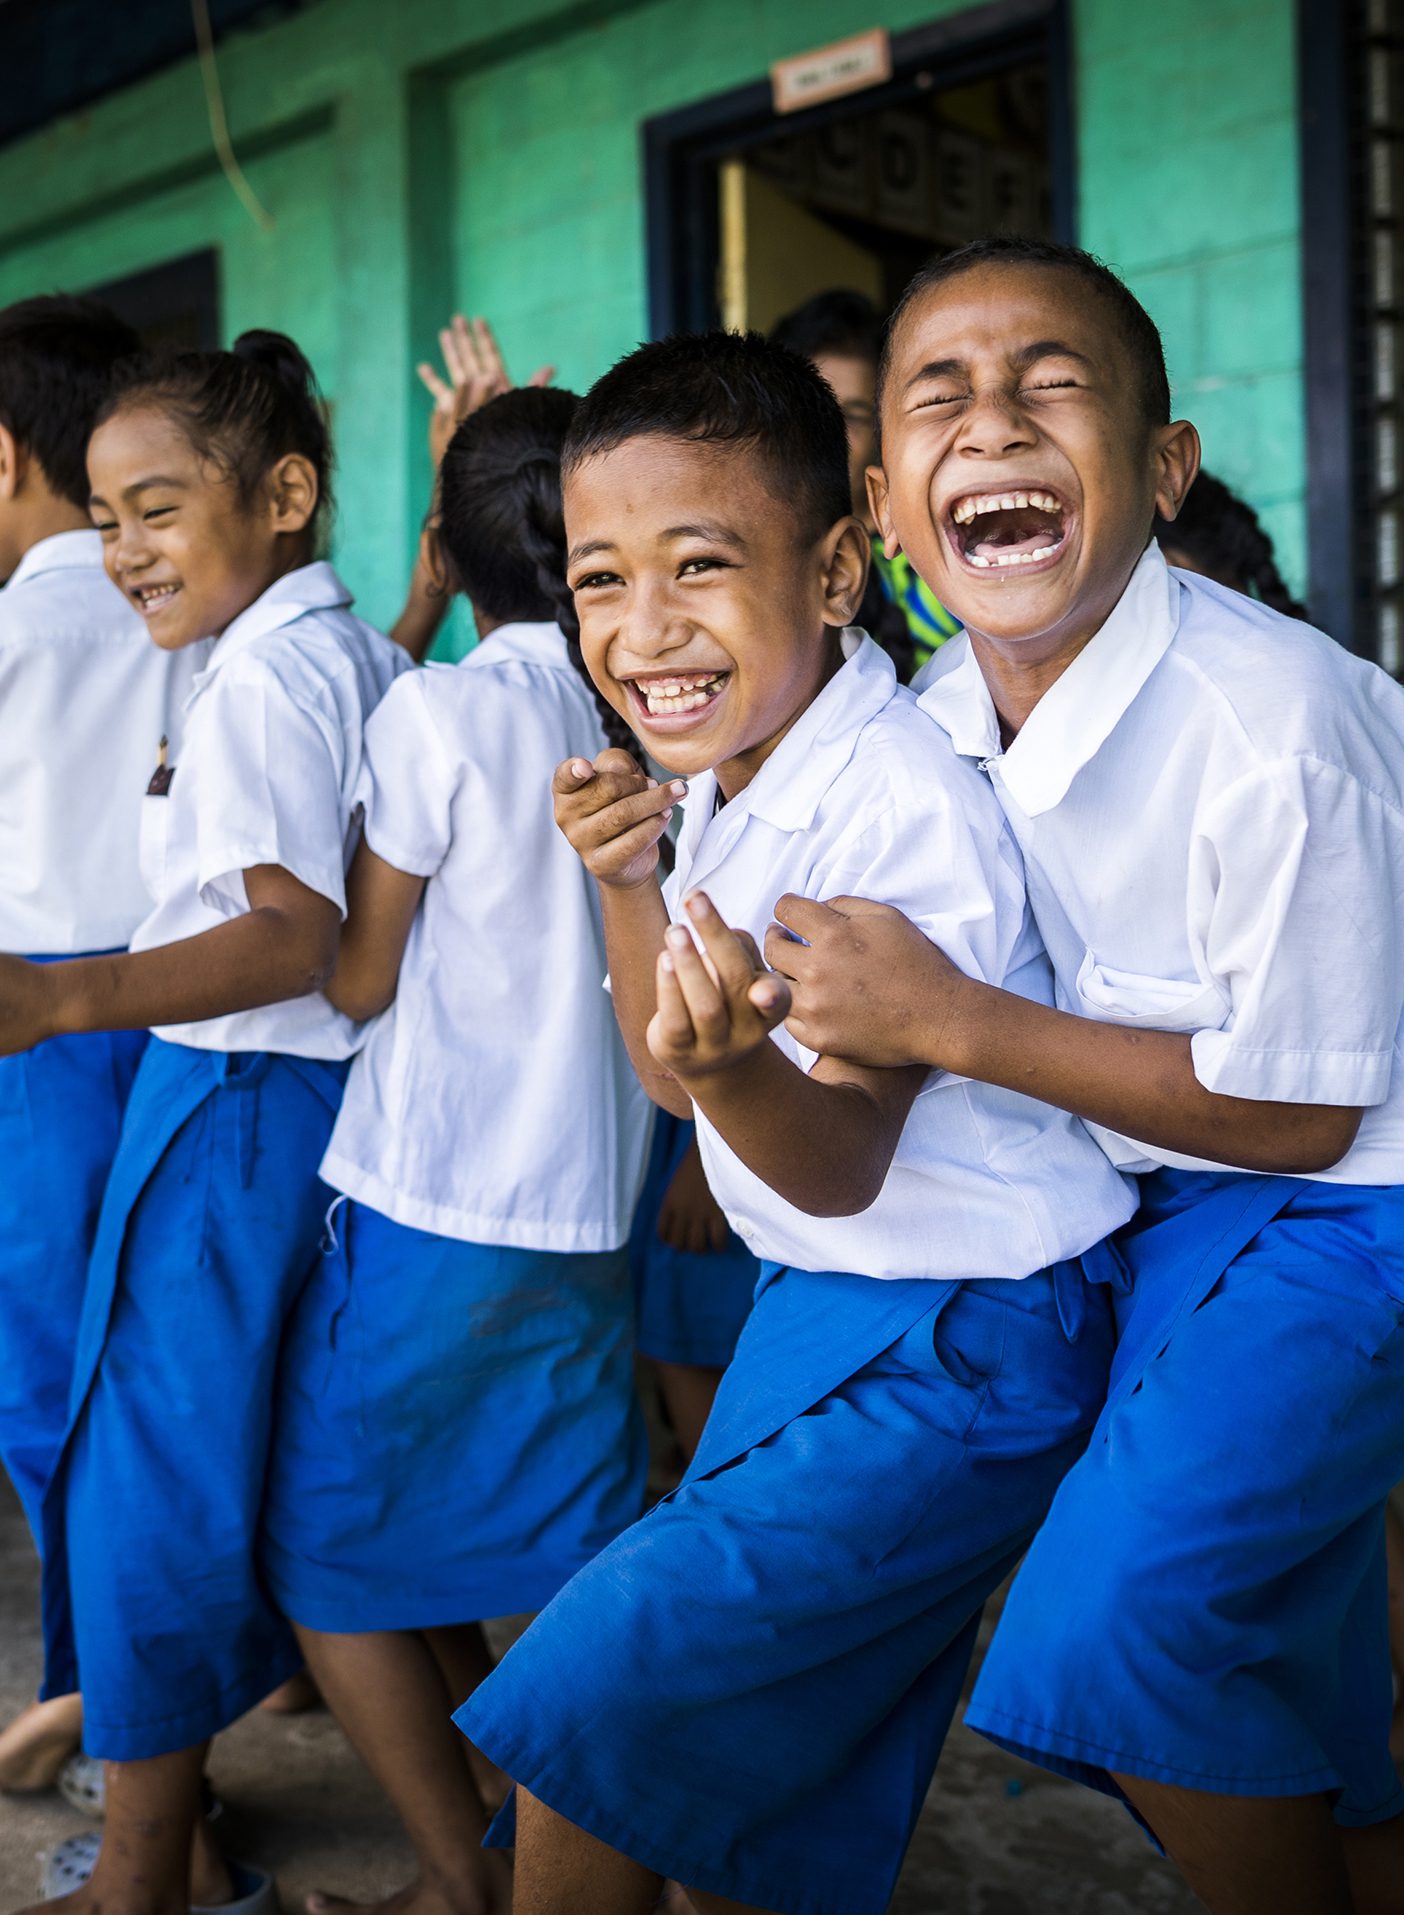 Three young Samoan students laugh together.